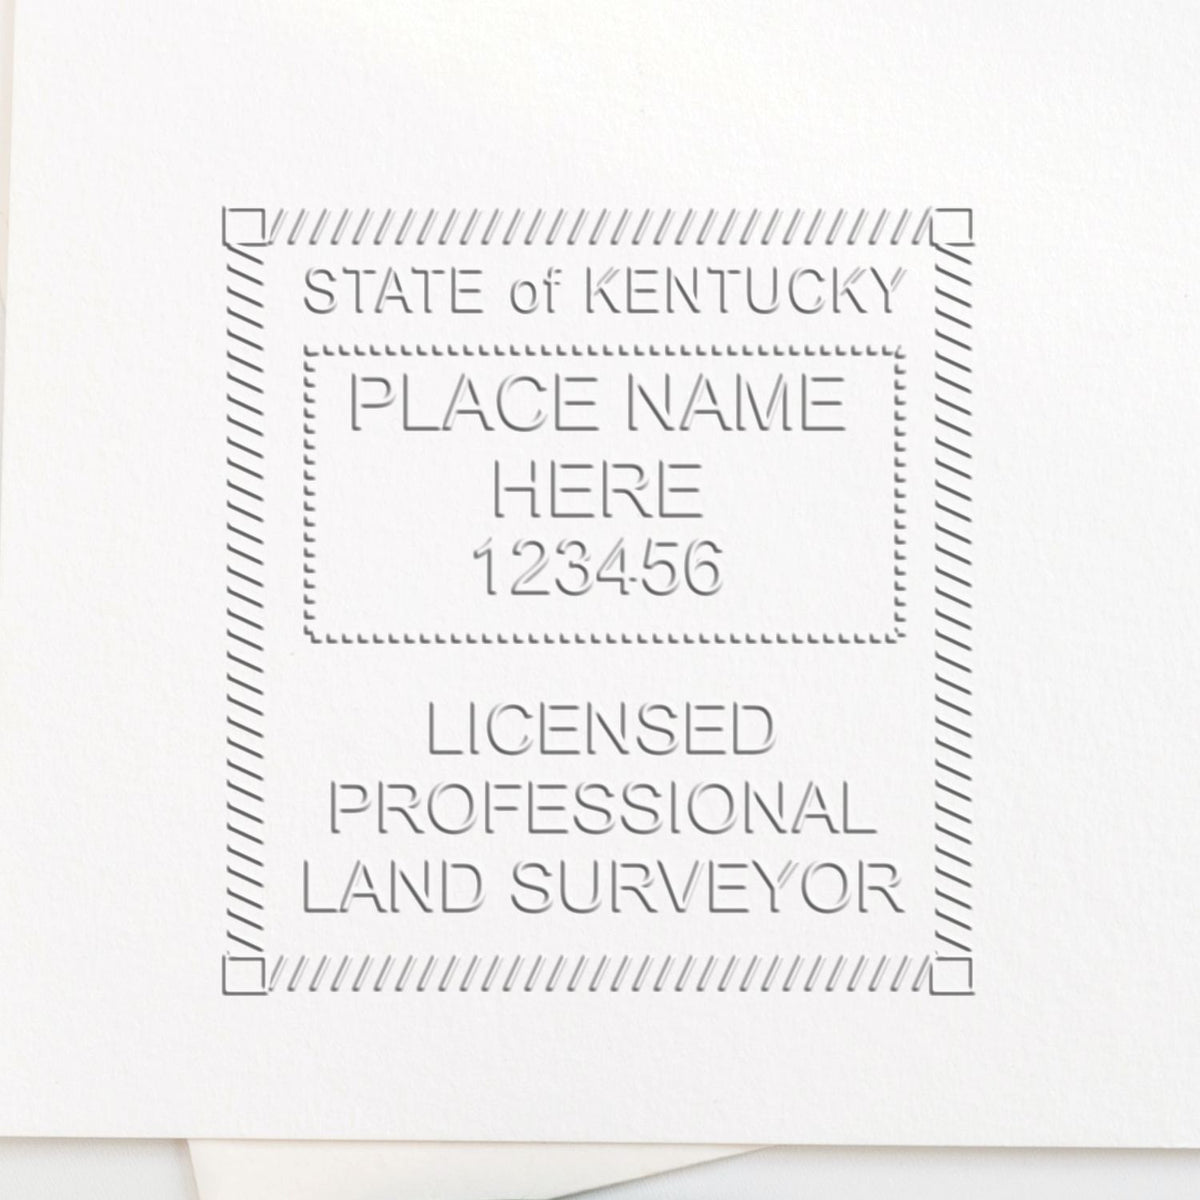 The Long Reach Kentucky Land Surveyor Seal stamp impression comes to life with a crisp, detailed photo on paper - showcasing true professional quality.